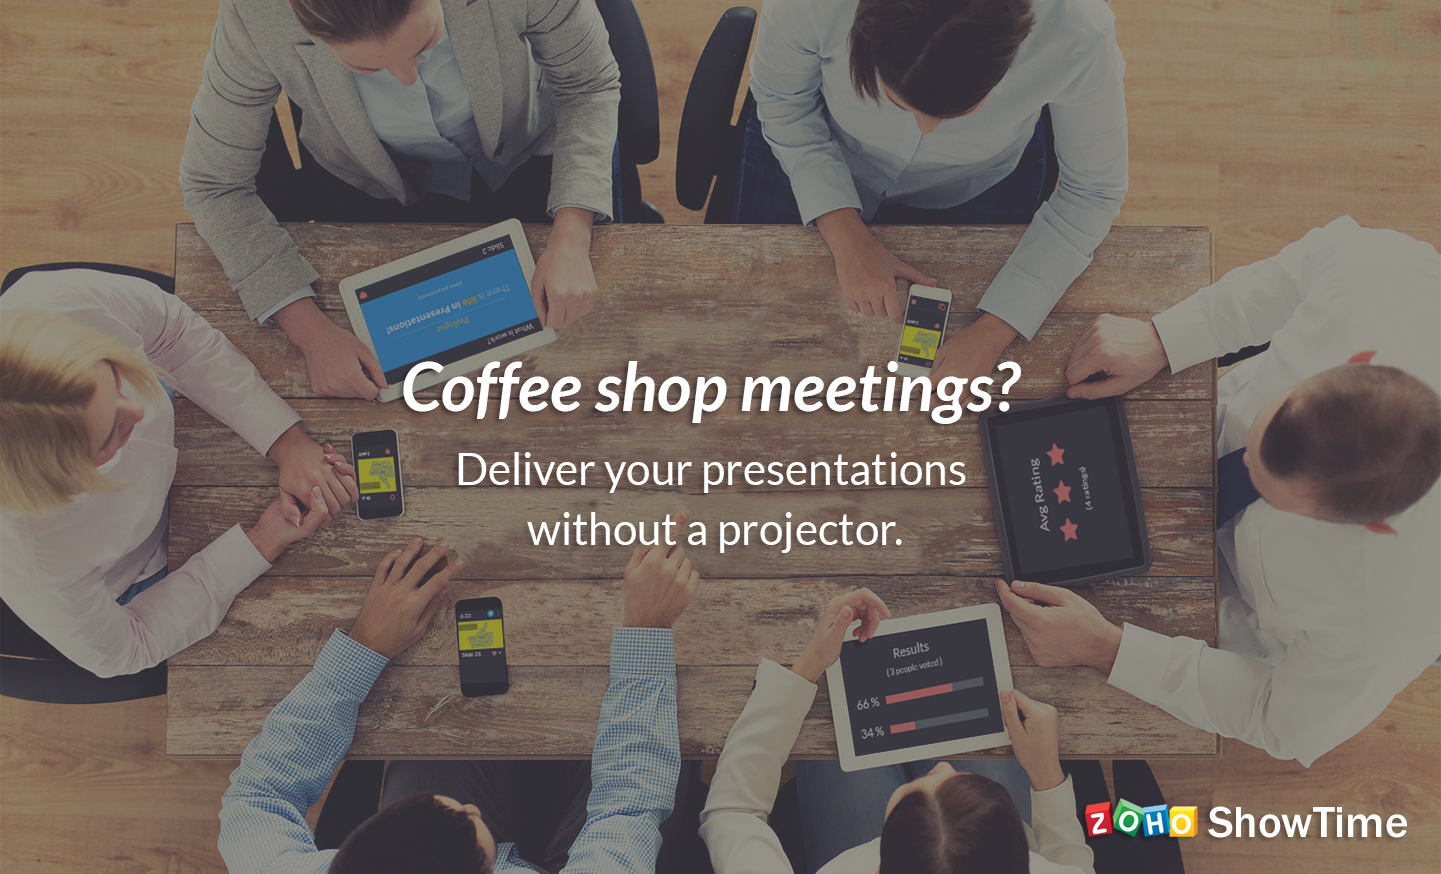 Zoho ShowTime - Enabling New Age Business Meetings